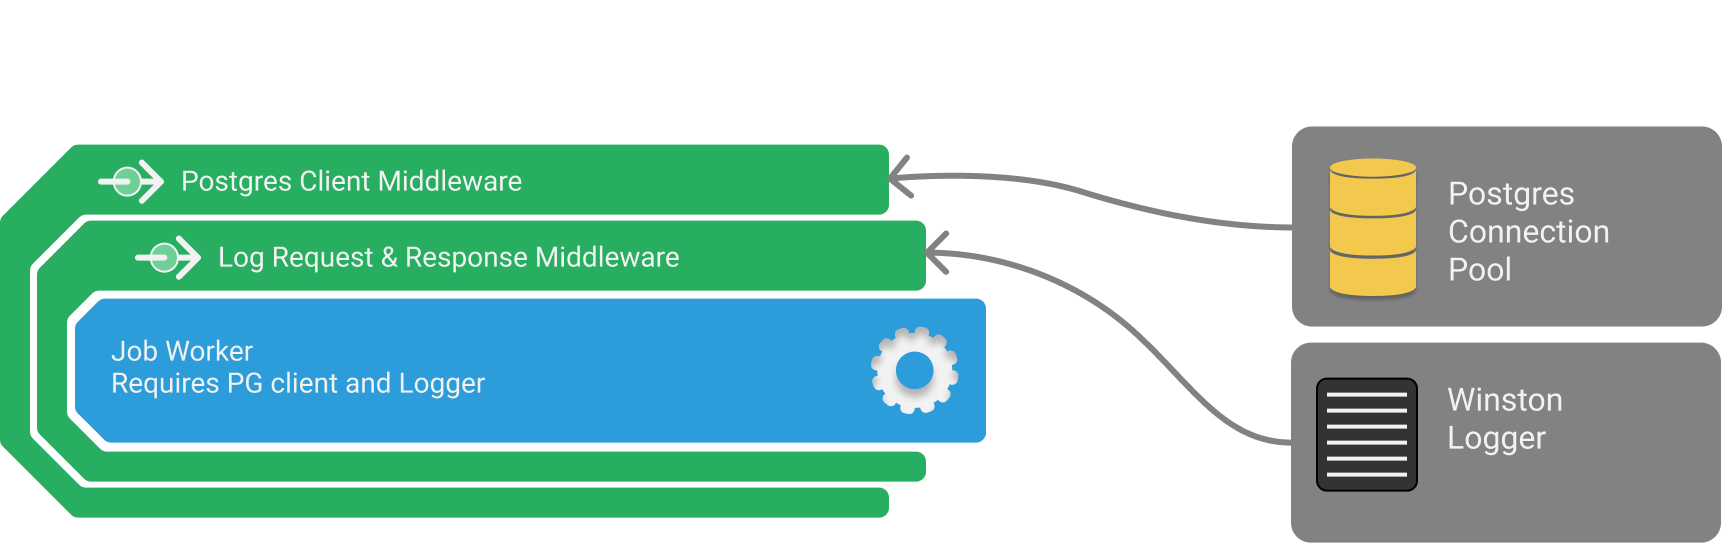 An image illustrating how middlewares work